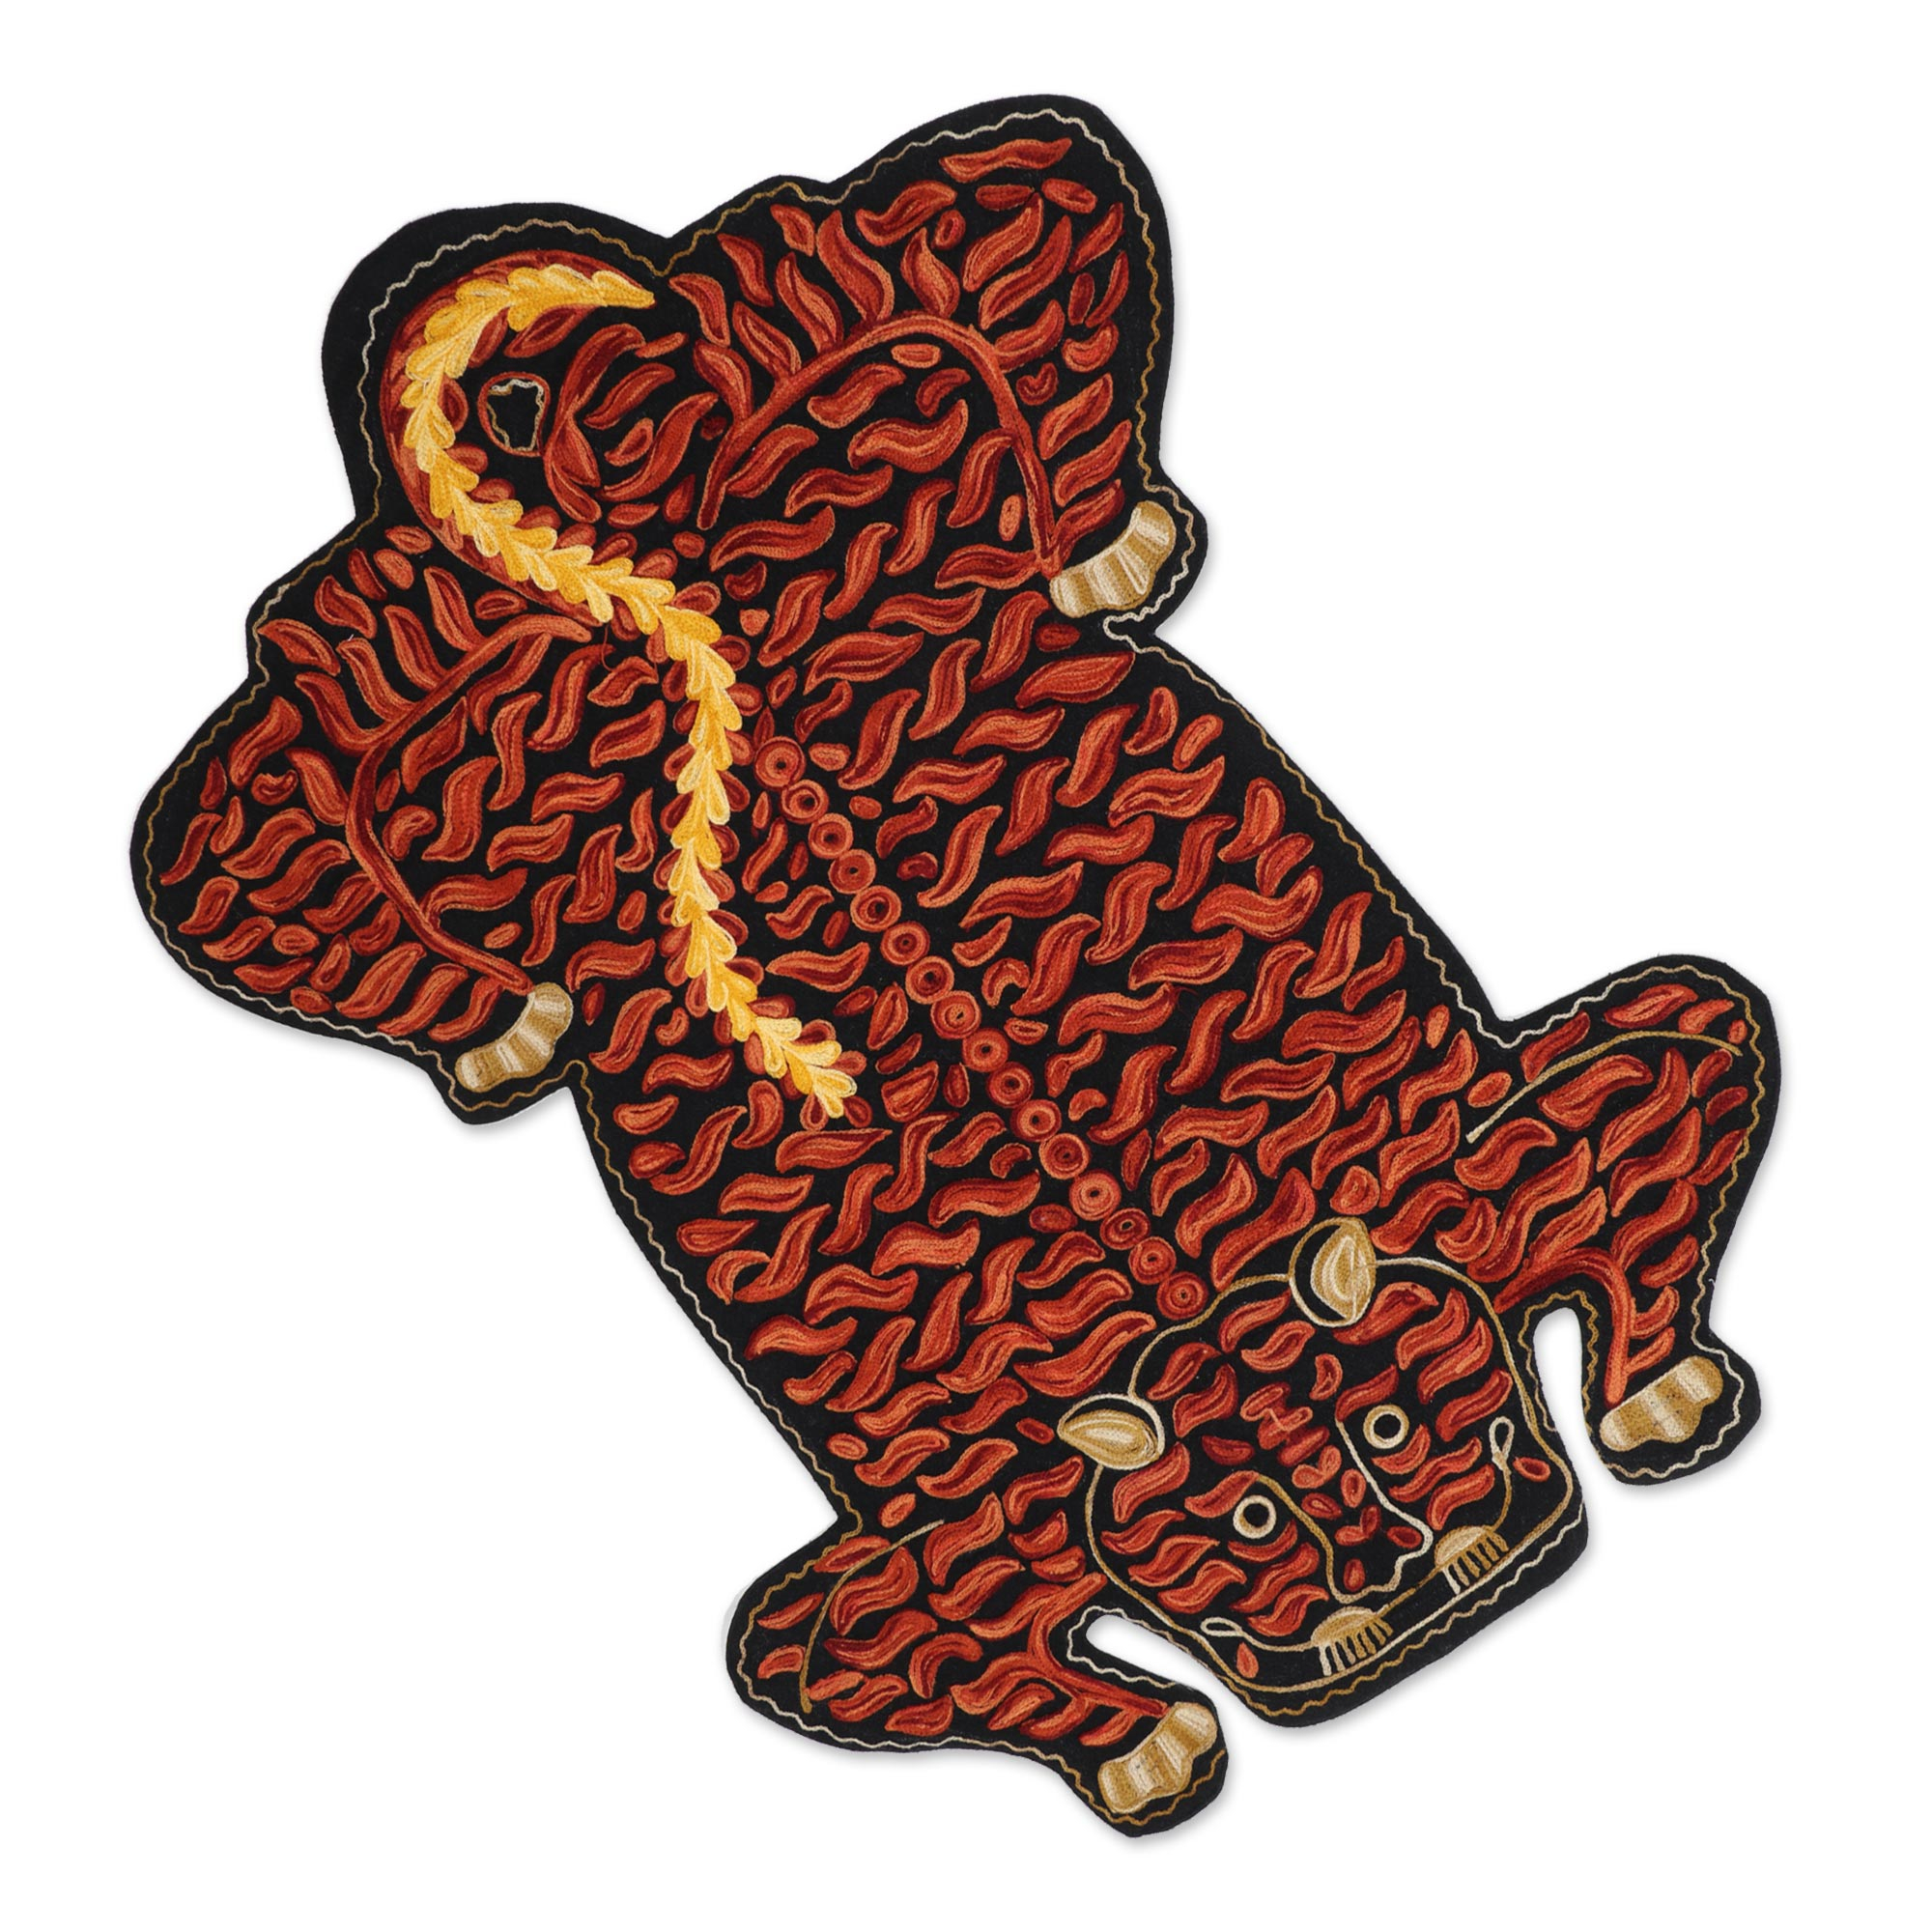 UNICEF Market  Chain Stitch Wool and Cotton Tiger Rug - Crouching